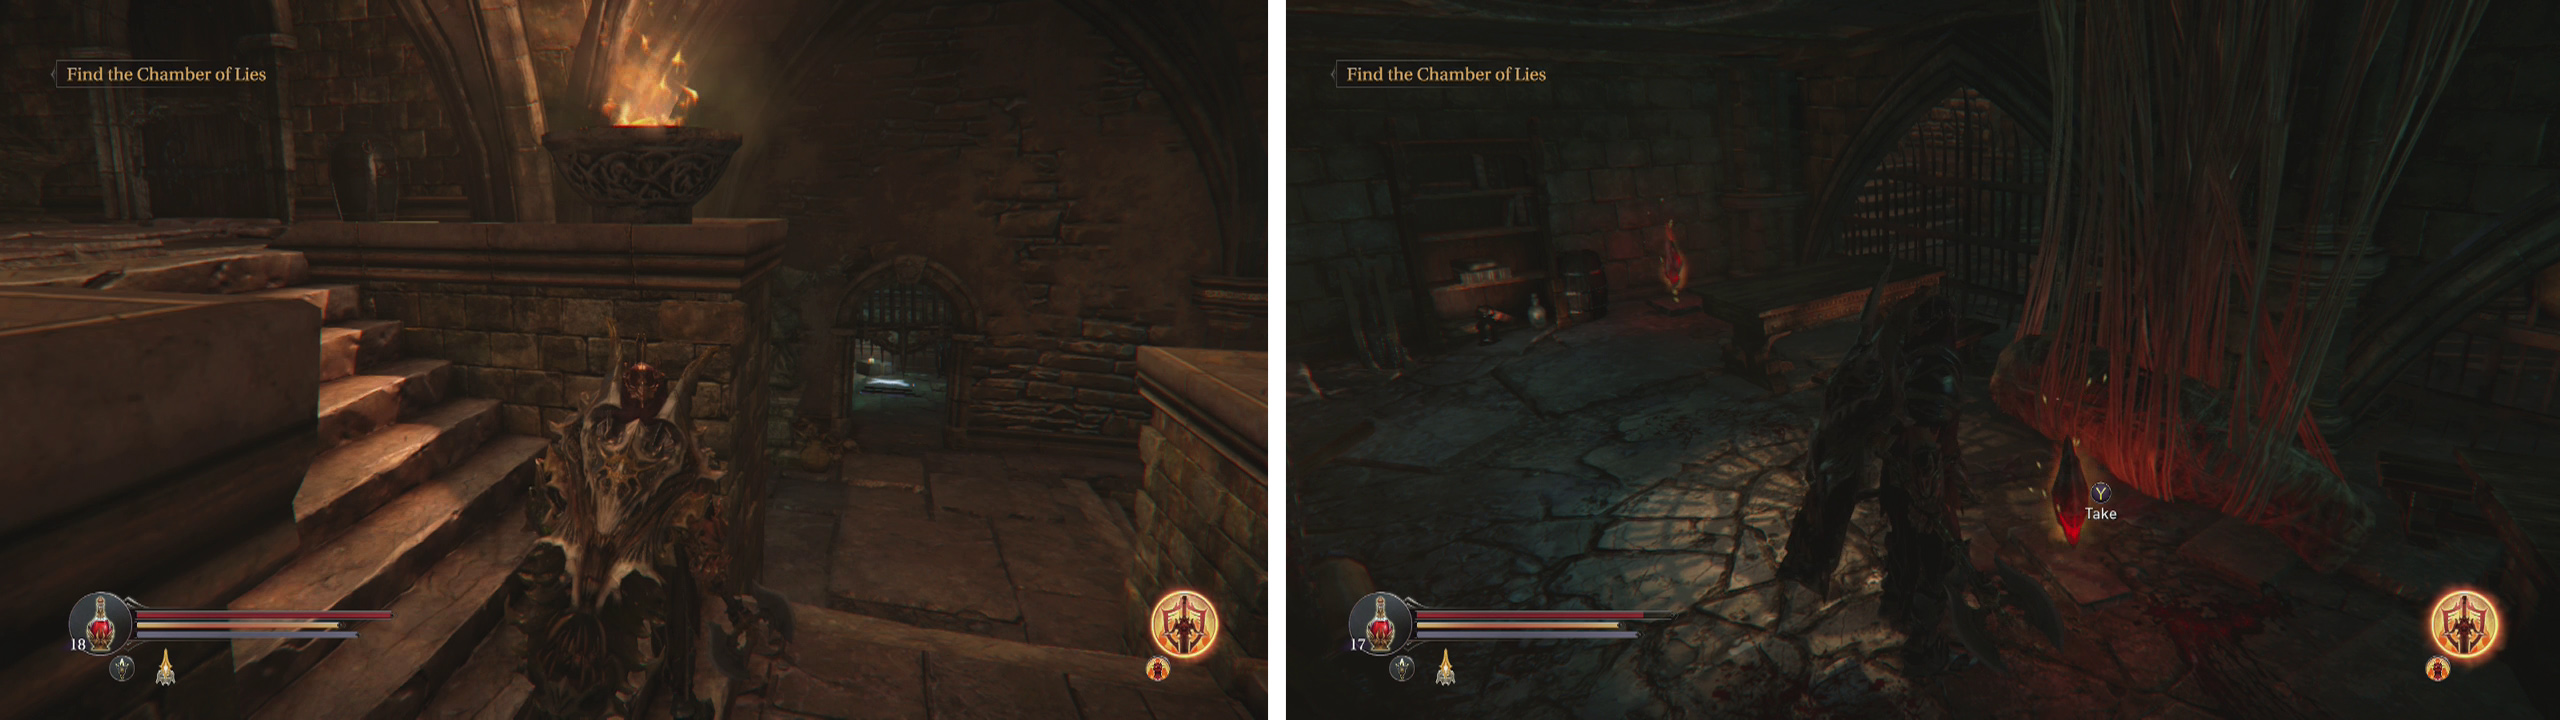 Roll under the half-open gate for a pressure plate (left). Enter the door it opens, kill the Spider and interact with the glowing coccoon (right) for a quest item.